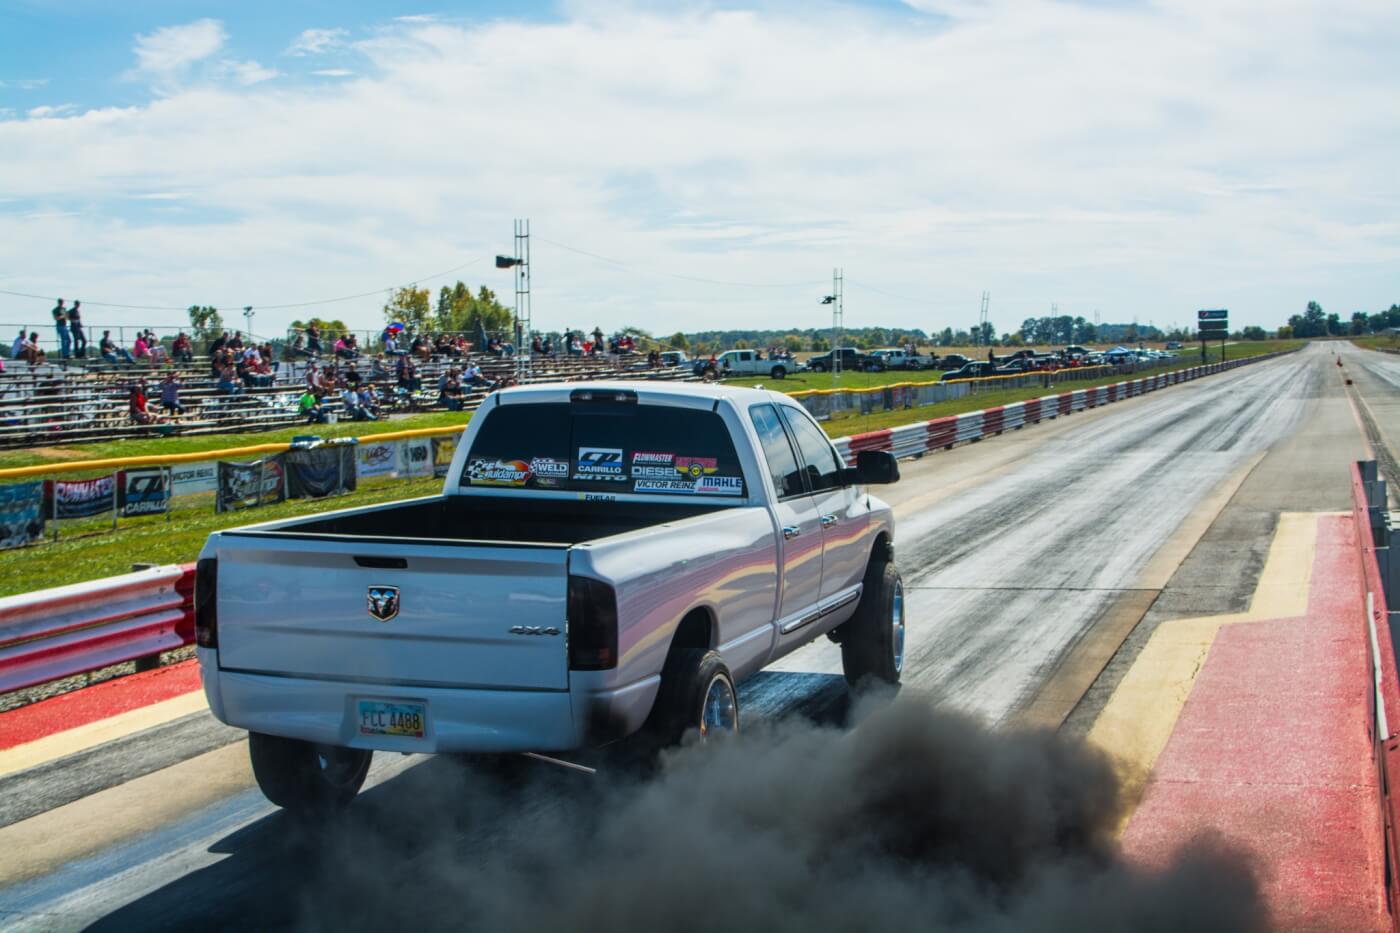 Lavon Miller in his Firepunk Dodge took second place in the Unlimited class. Still, he turned in a respectable 128.56 mph and a 10.81 elapsed time.